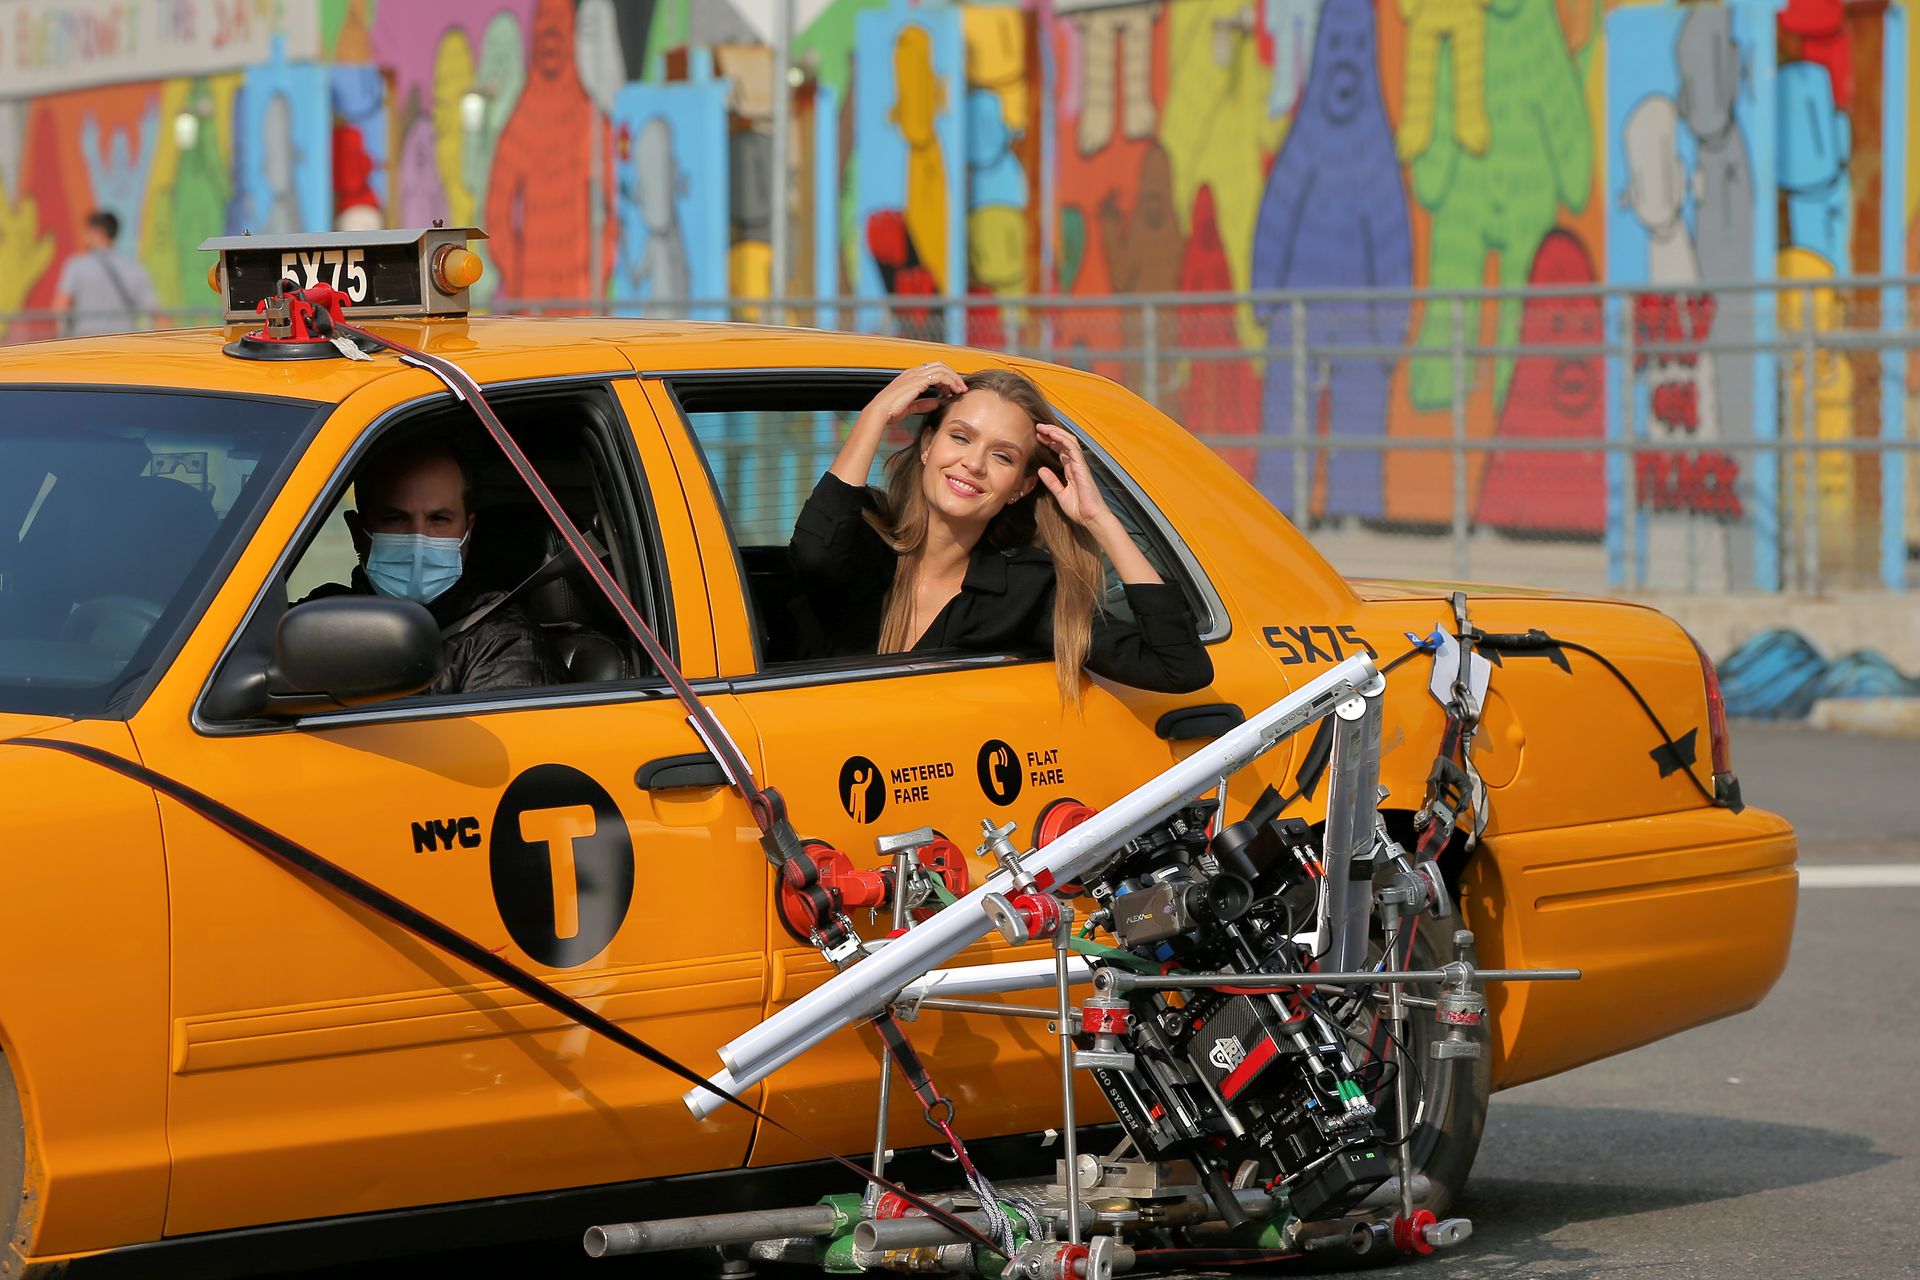 Josephine Skriver Films a Maybelline commercial in NYC (51 Photos)